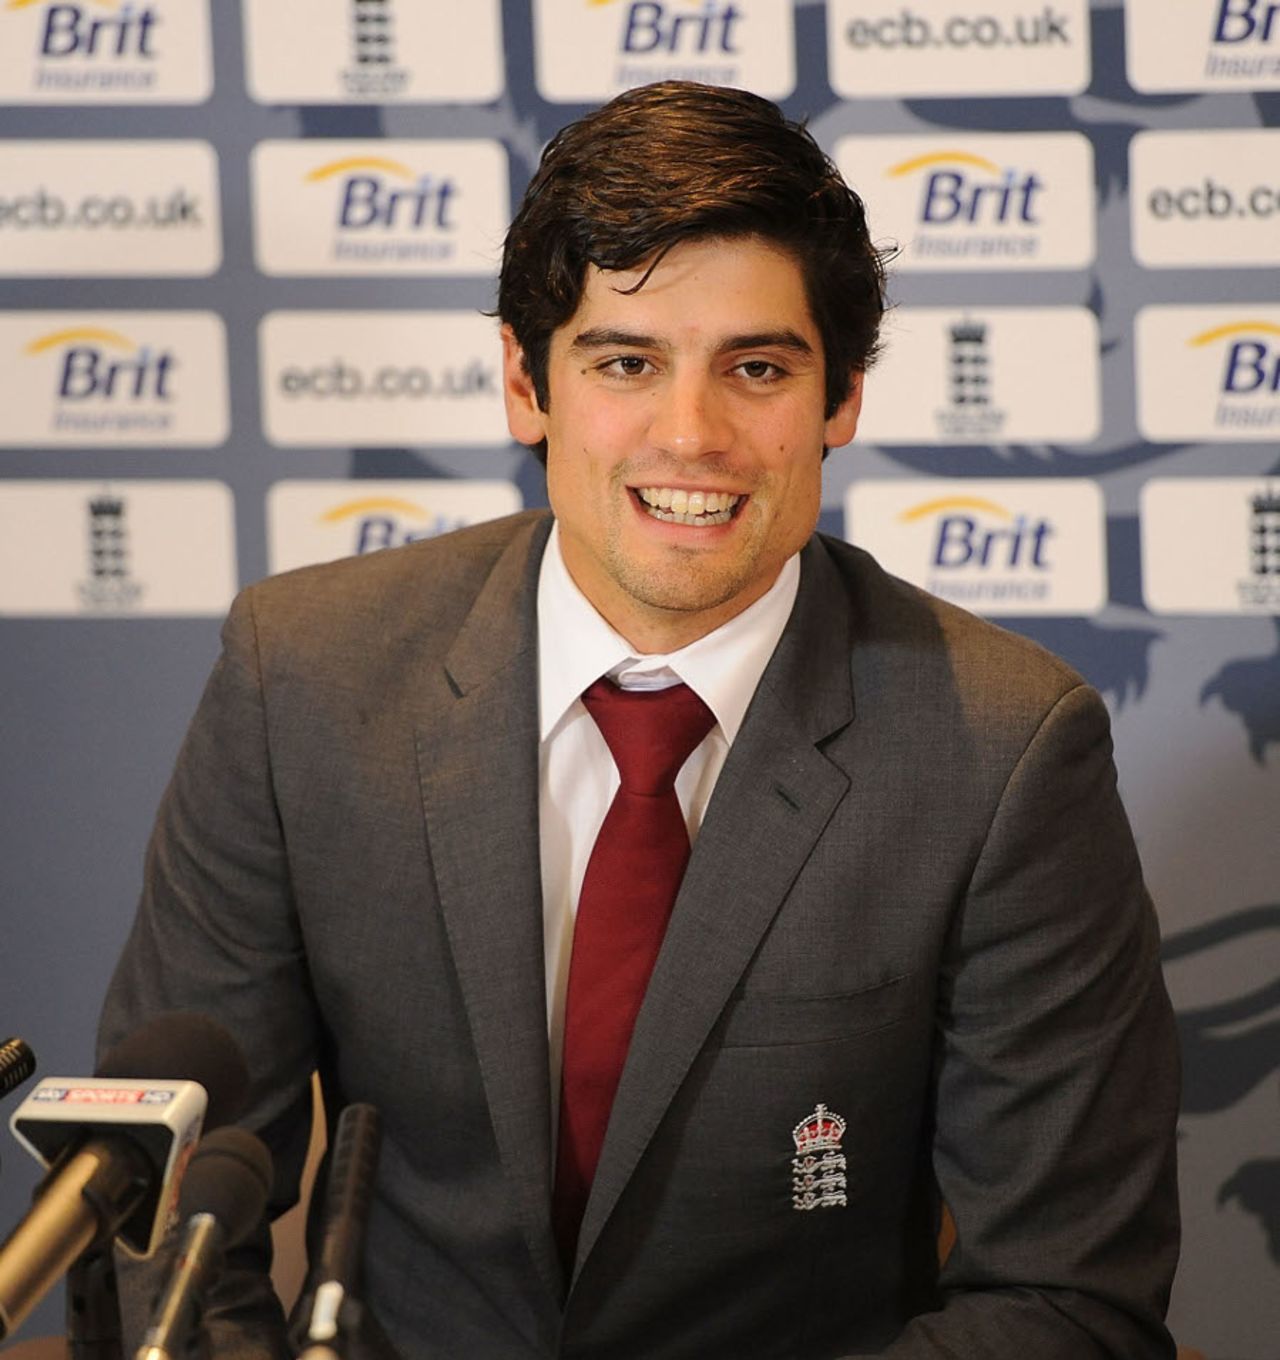 Alastair Cook was in relaxed mood at the airport, Heathrow, January 2, 2013